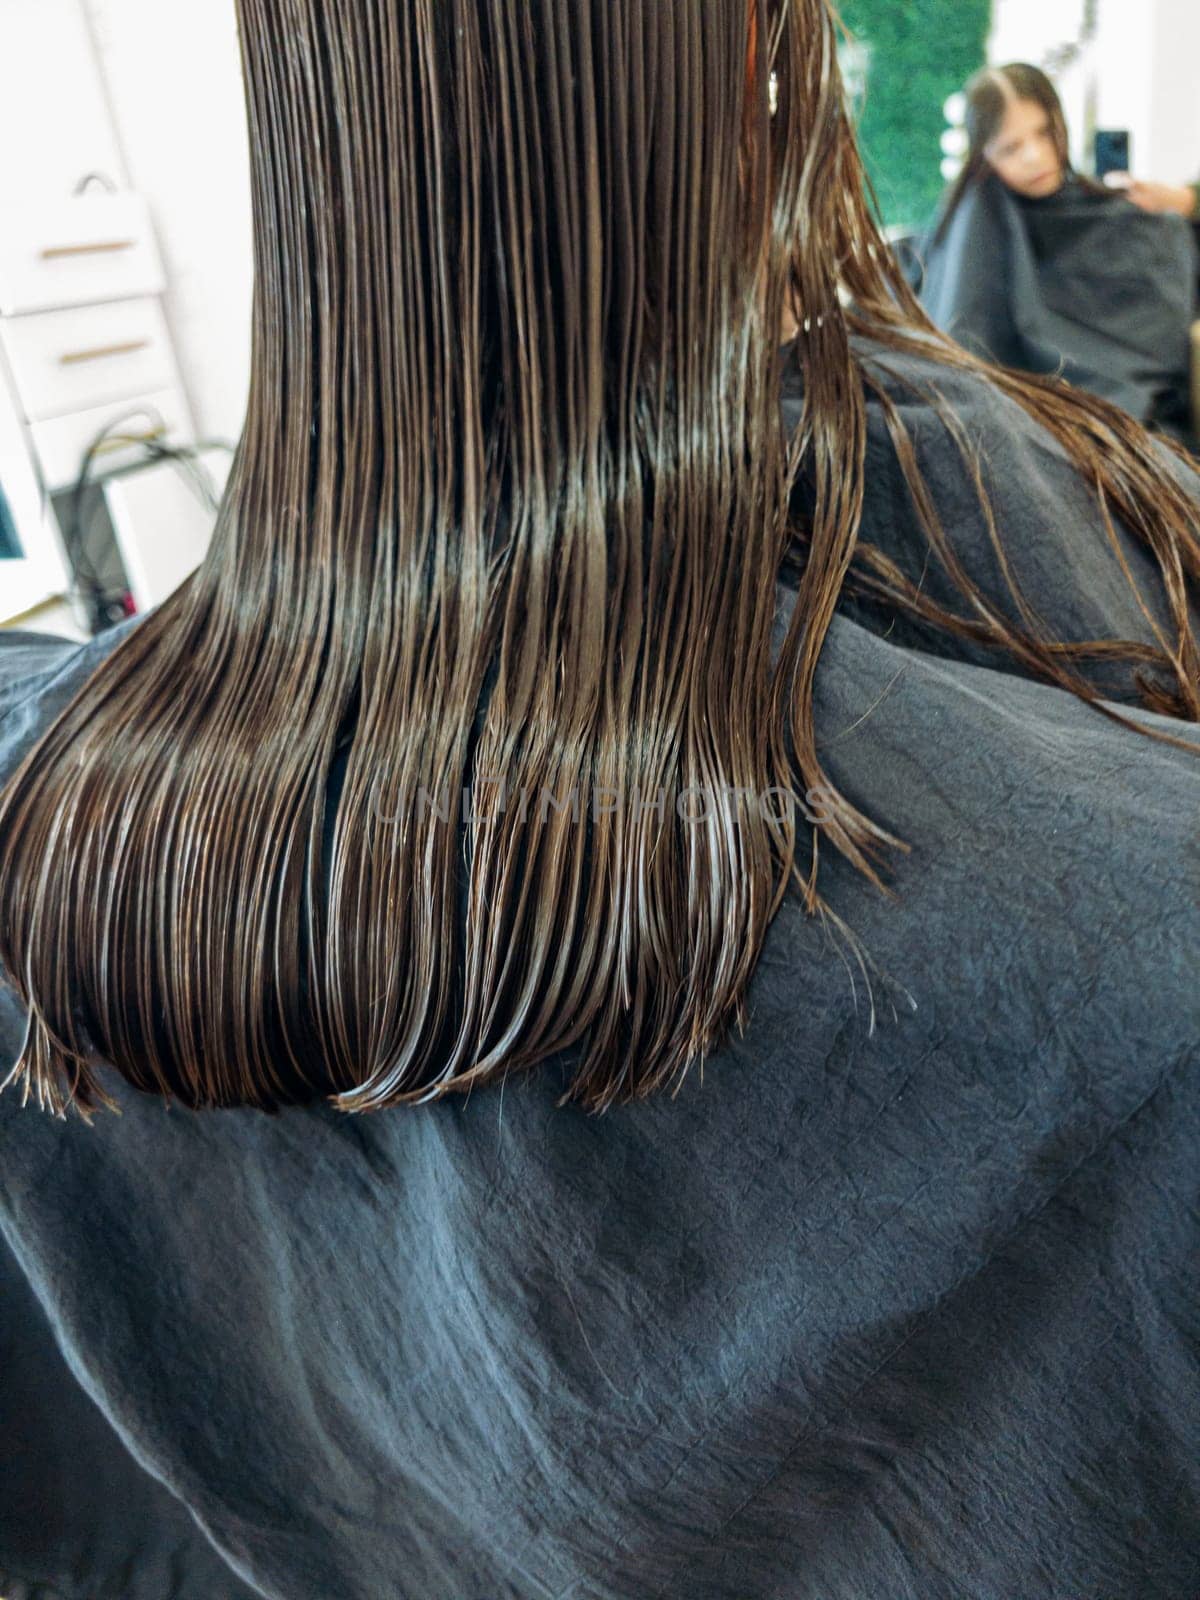 In the bustling atmosphere of a salon, a little girl sits patiently as a stylist with polished red nails carefully trims her damp hair. The sheen of the scissors and the precise hand movements capture the delicate process of styling a child's hair.